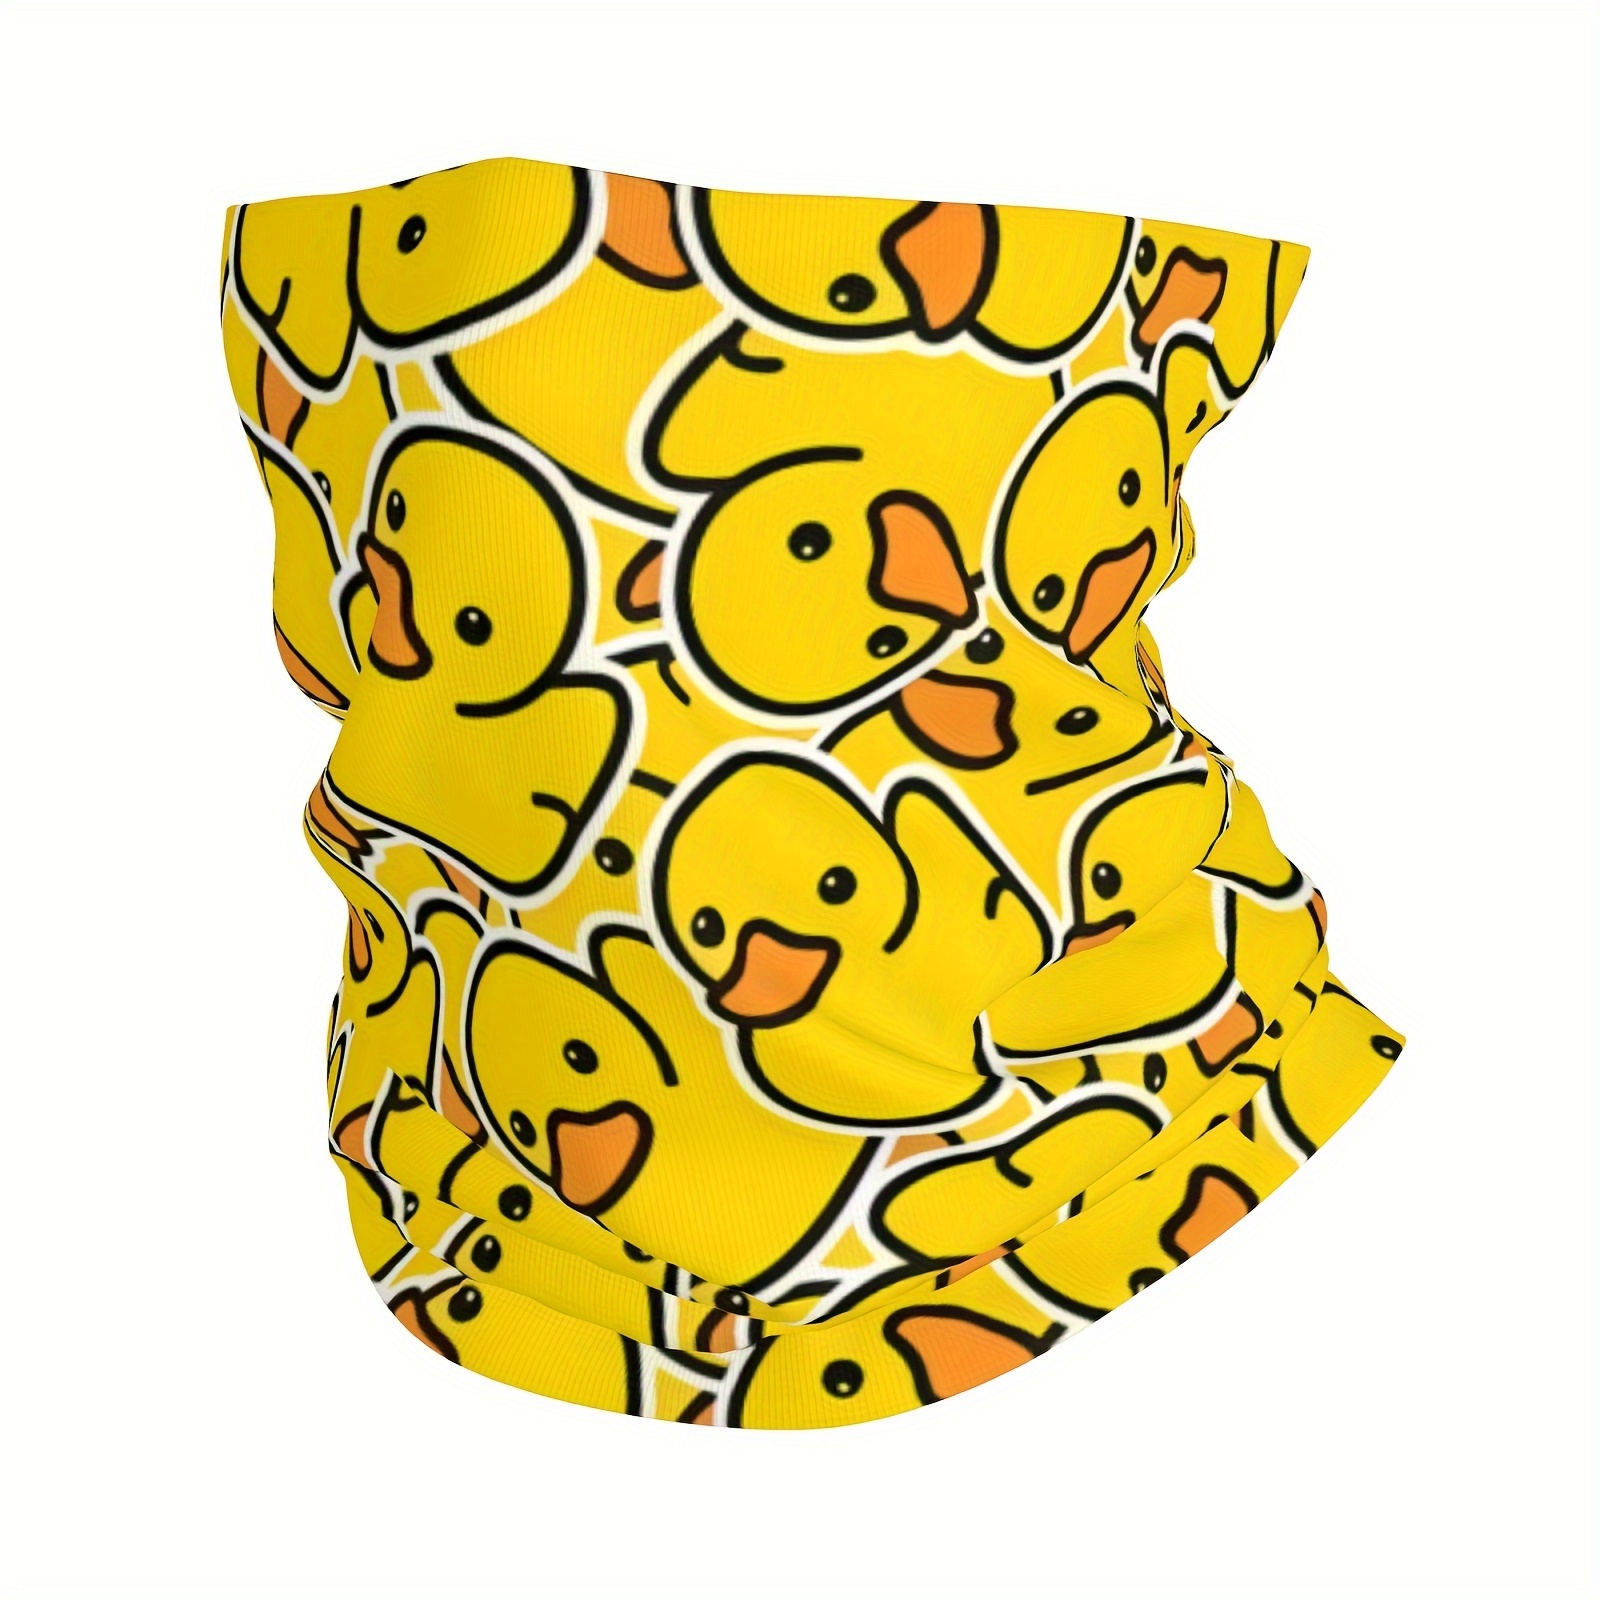 

Cute Funny Yellow Duck Pattern Mask, Neck Gaiter Wrap Scarf, Multi-use Cycling Windproof Breathable Mask, For Hiking Fishing Outdoor Sports